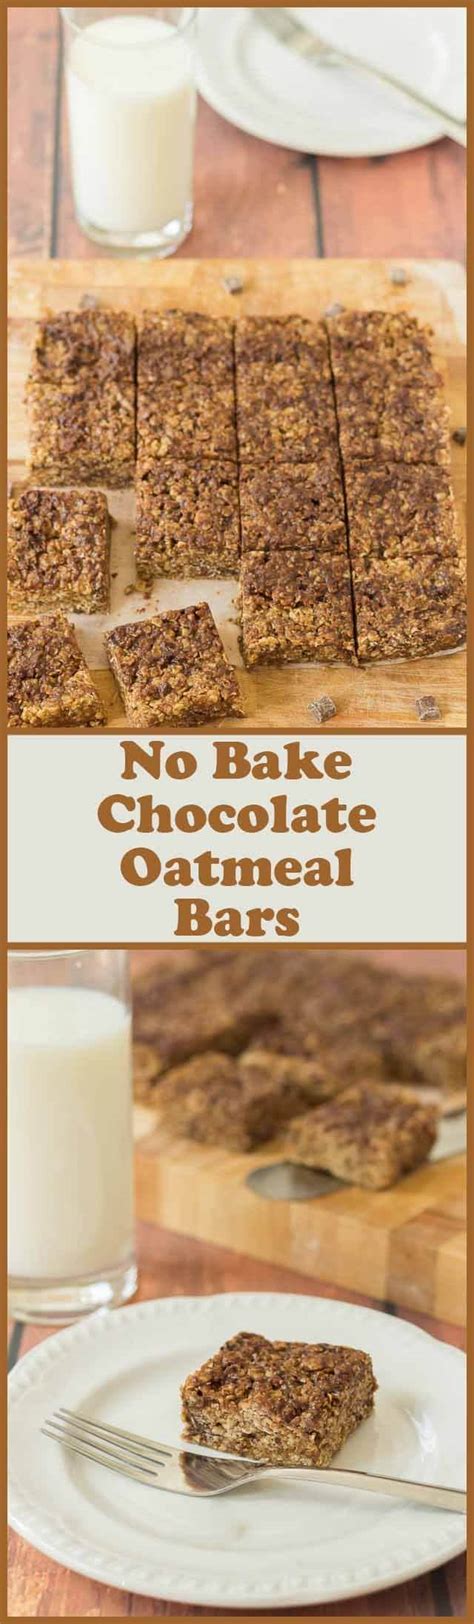 Just like my mom's oatmeal cookie bars only a little chewier and a little less crumbly, but the flavor is spot on and then of course there are oats… and quinoa for added health and texture, and plenty of dark chocolate. No Bake Chocolate Oatmeal Bars - Neils Healthy Meals